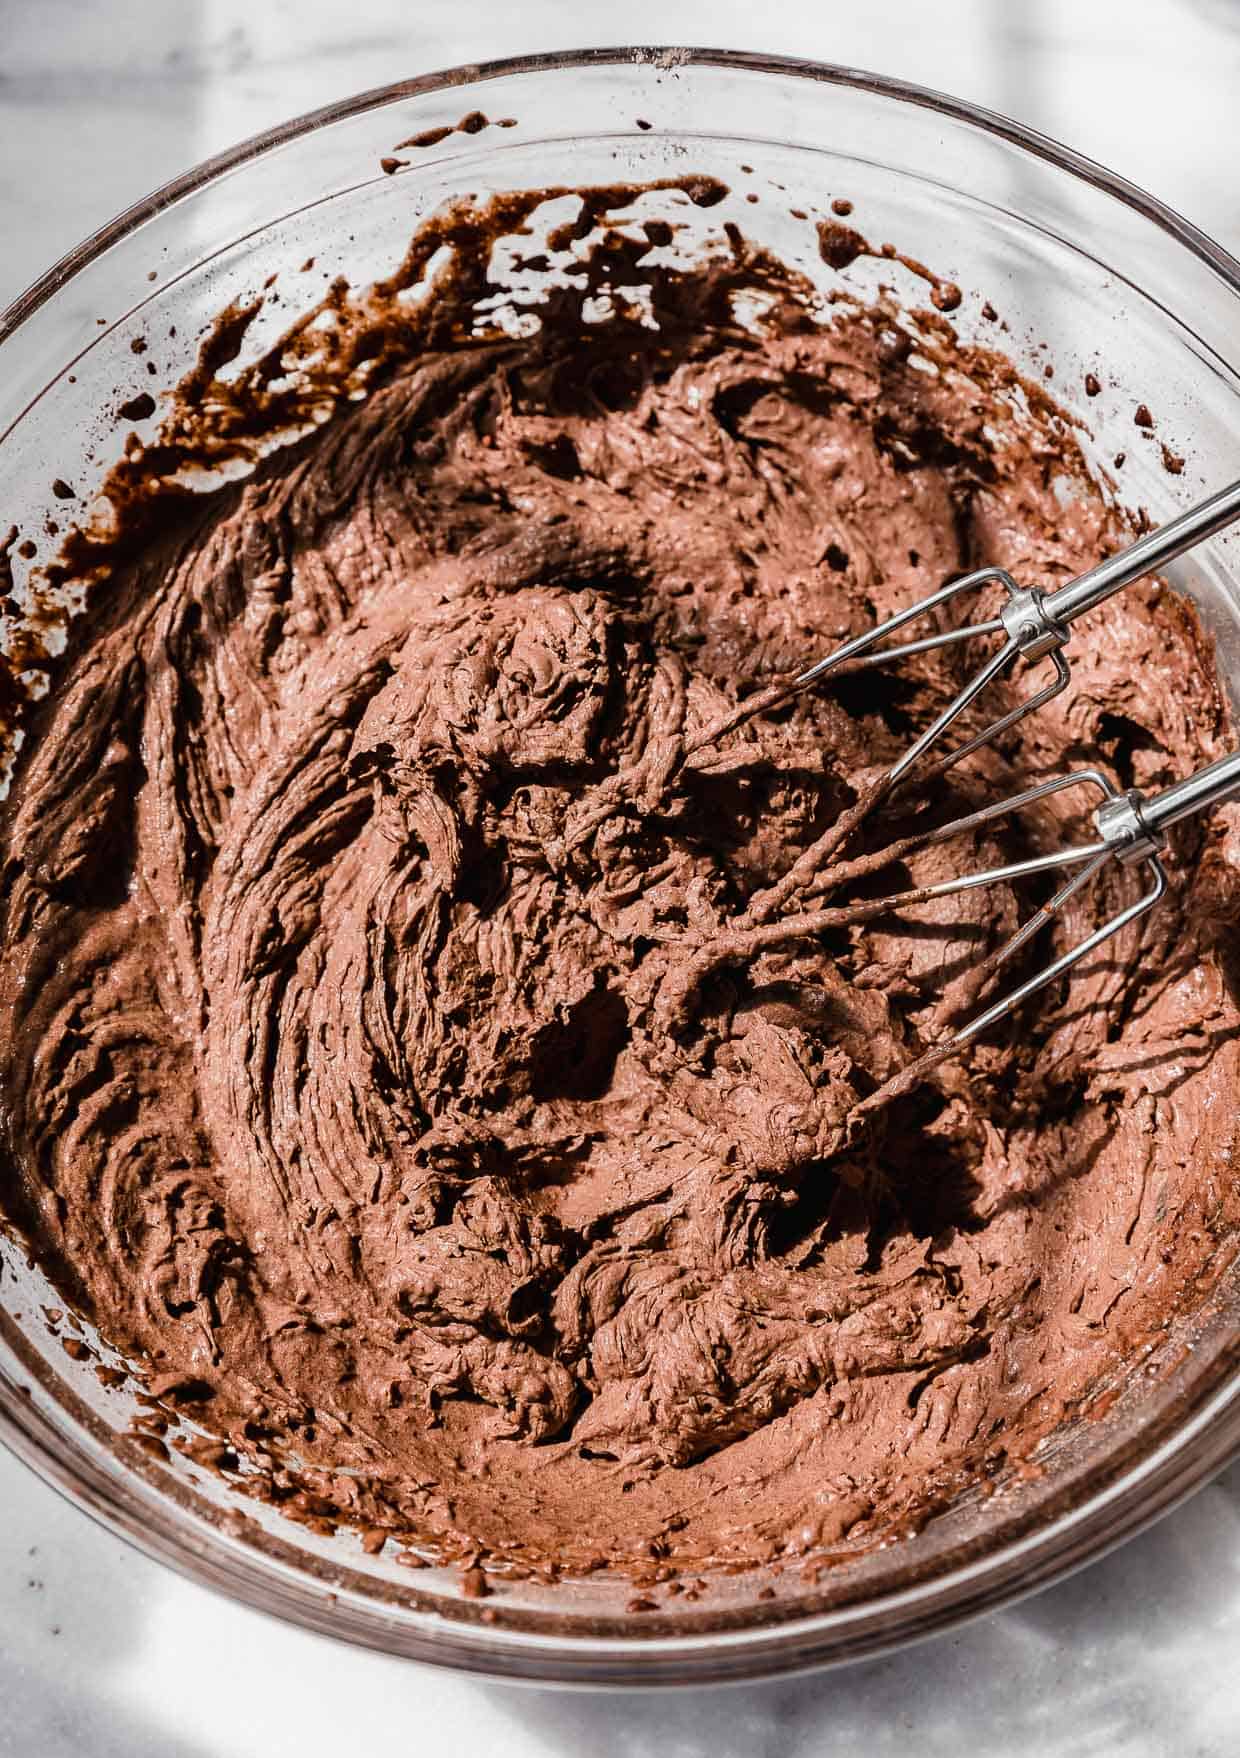 Chocolate pudding frosting in a glass bowl.